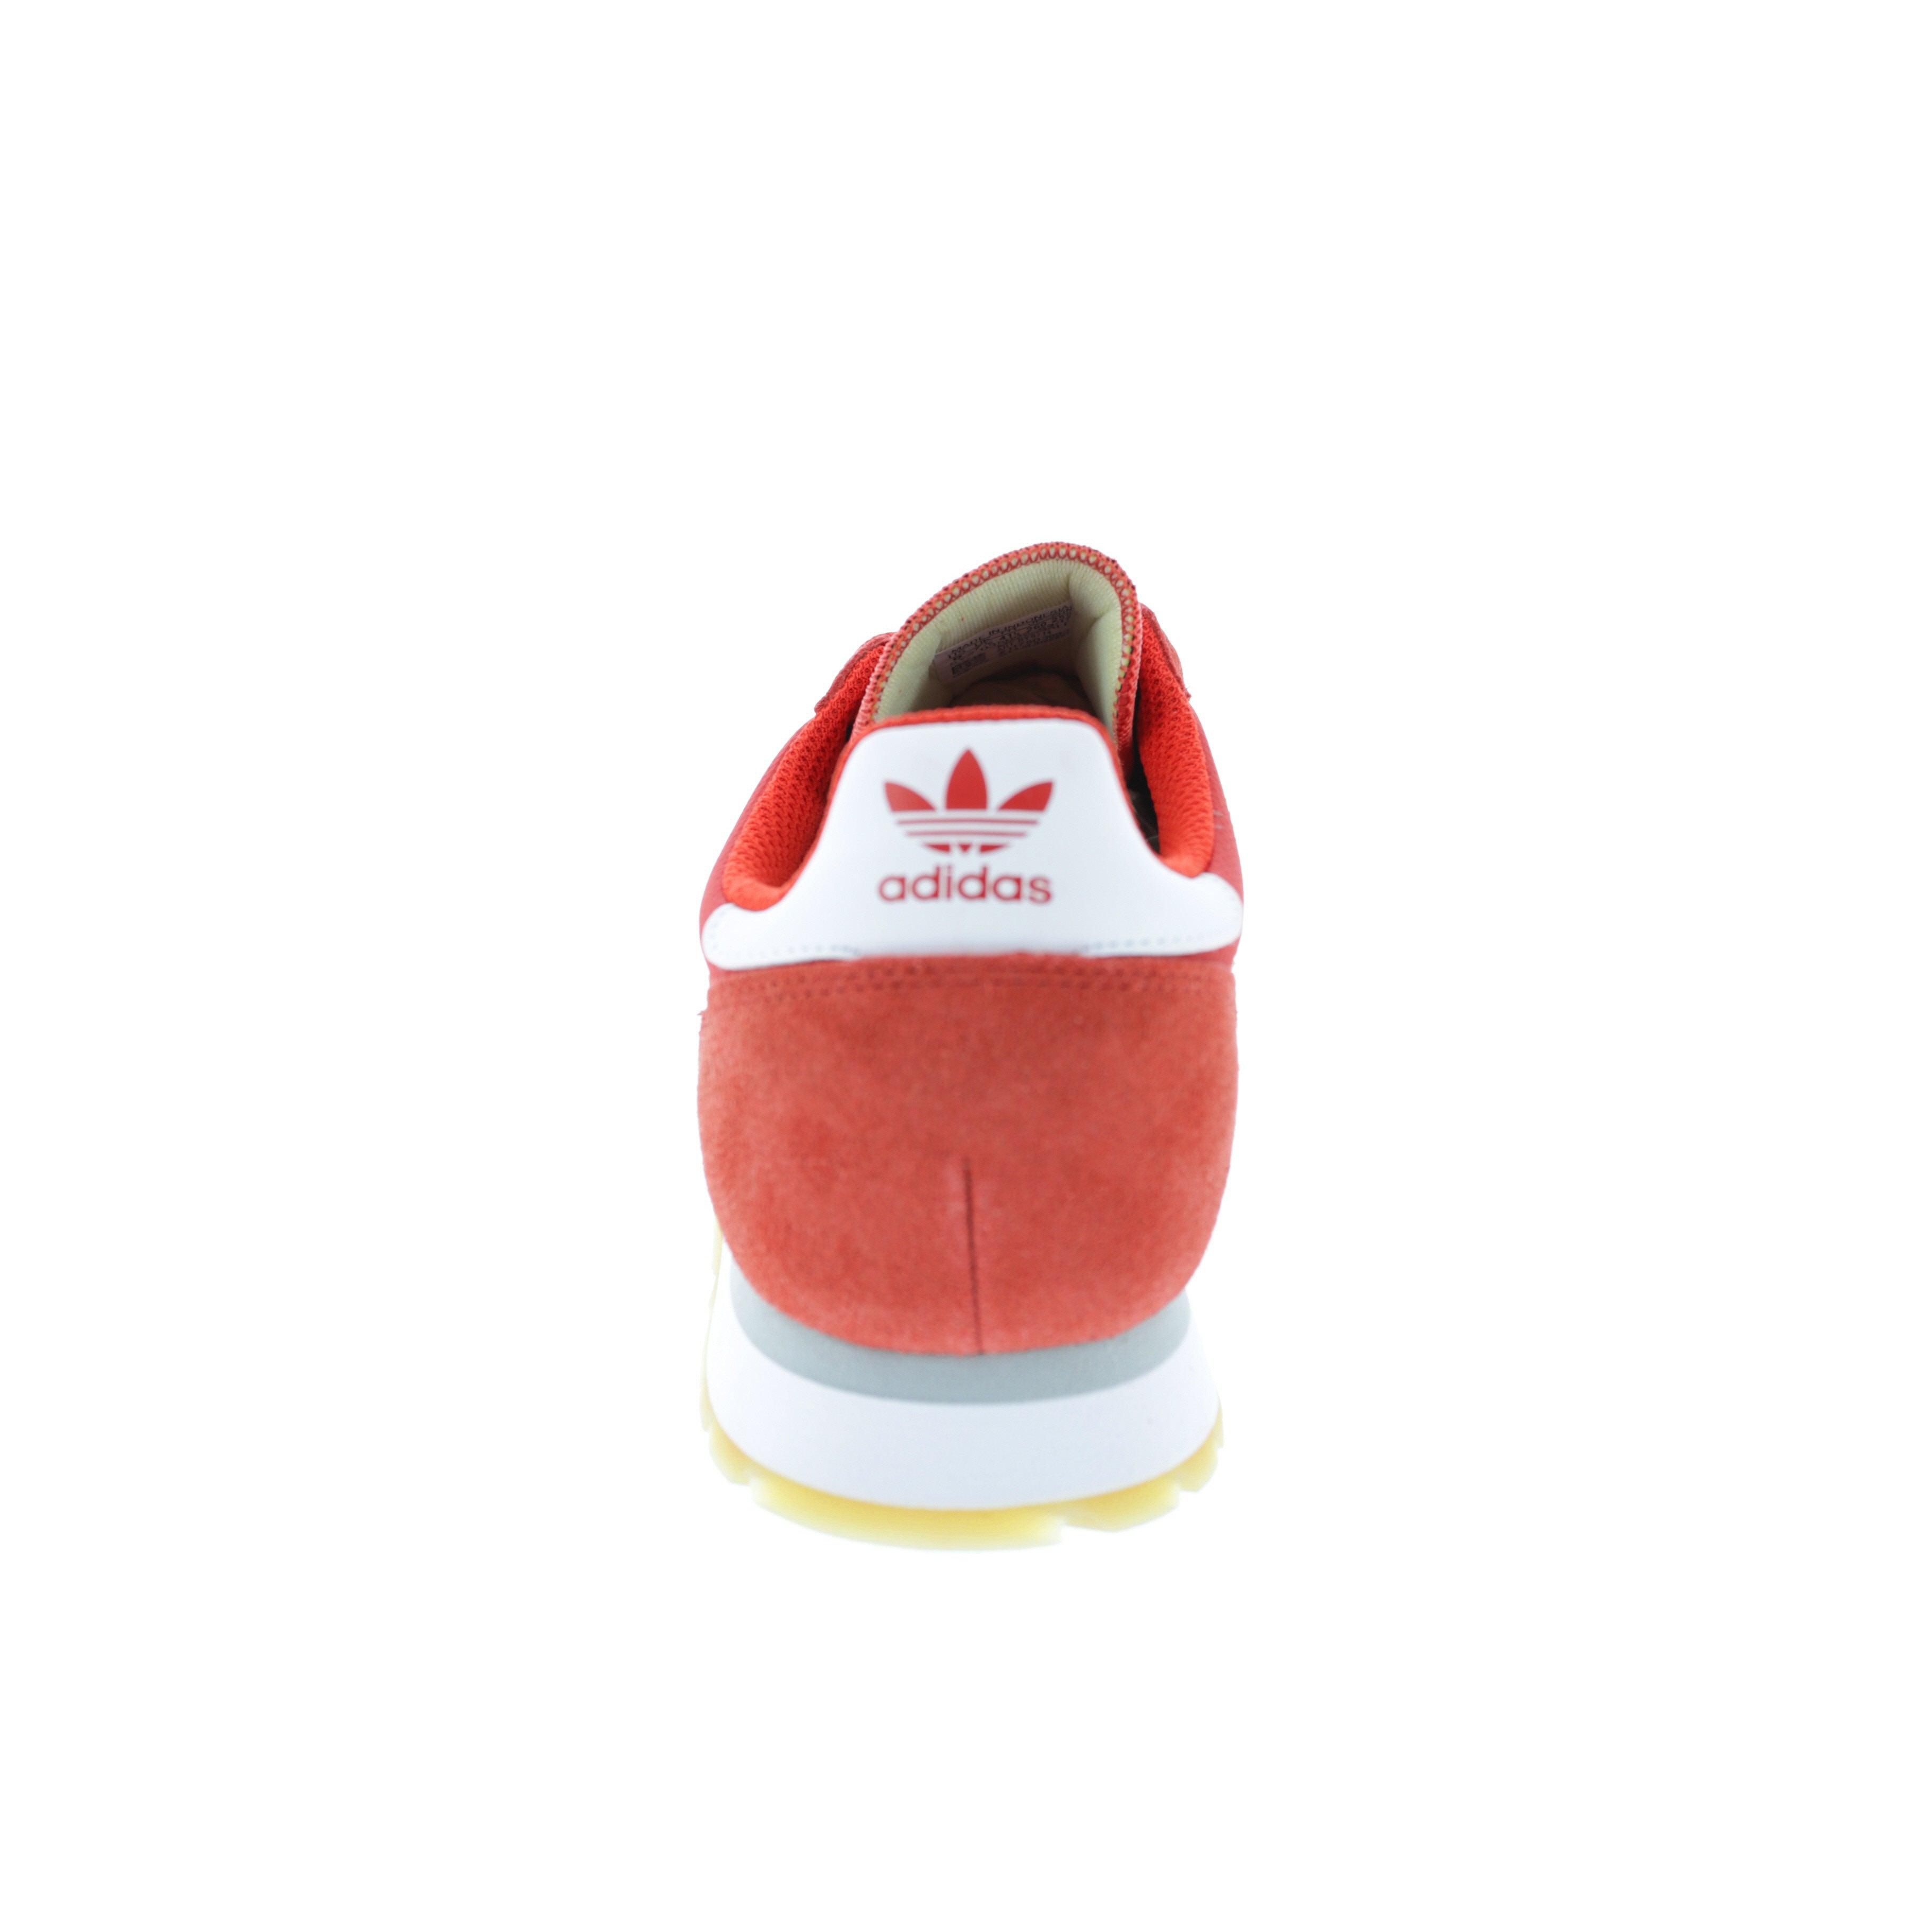 Adidas Originals Haven Red/White/Gum | BY9714 | Culture Kings